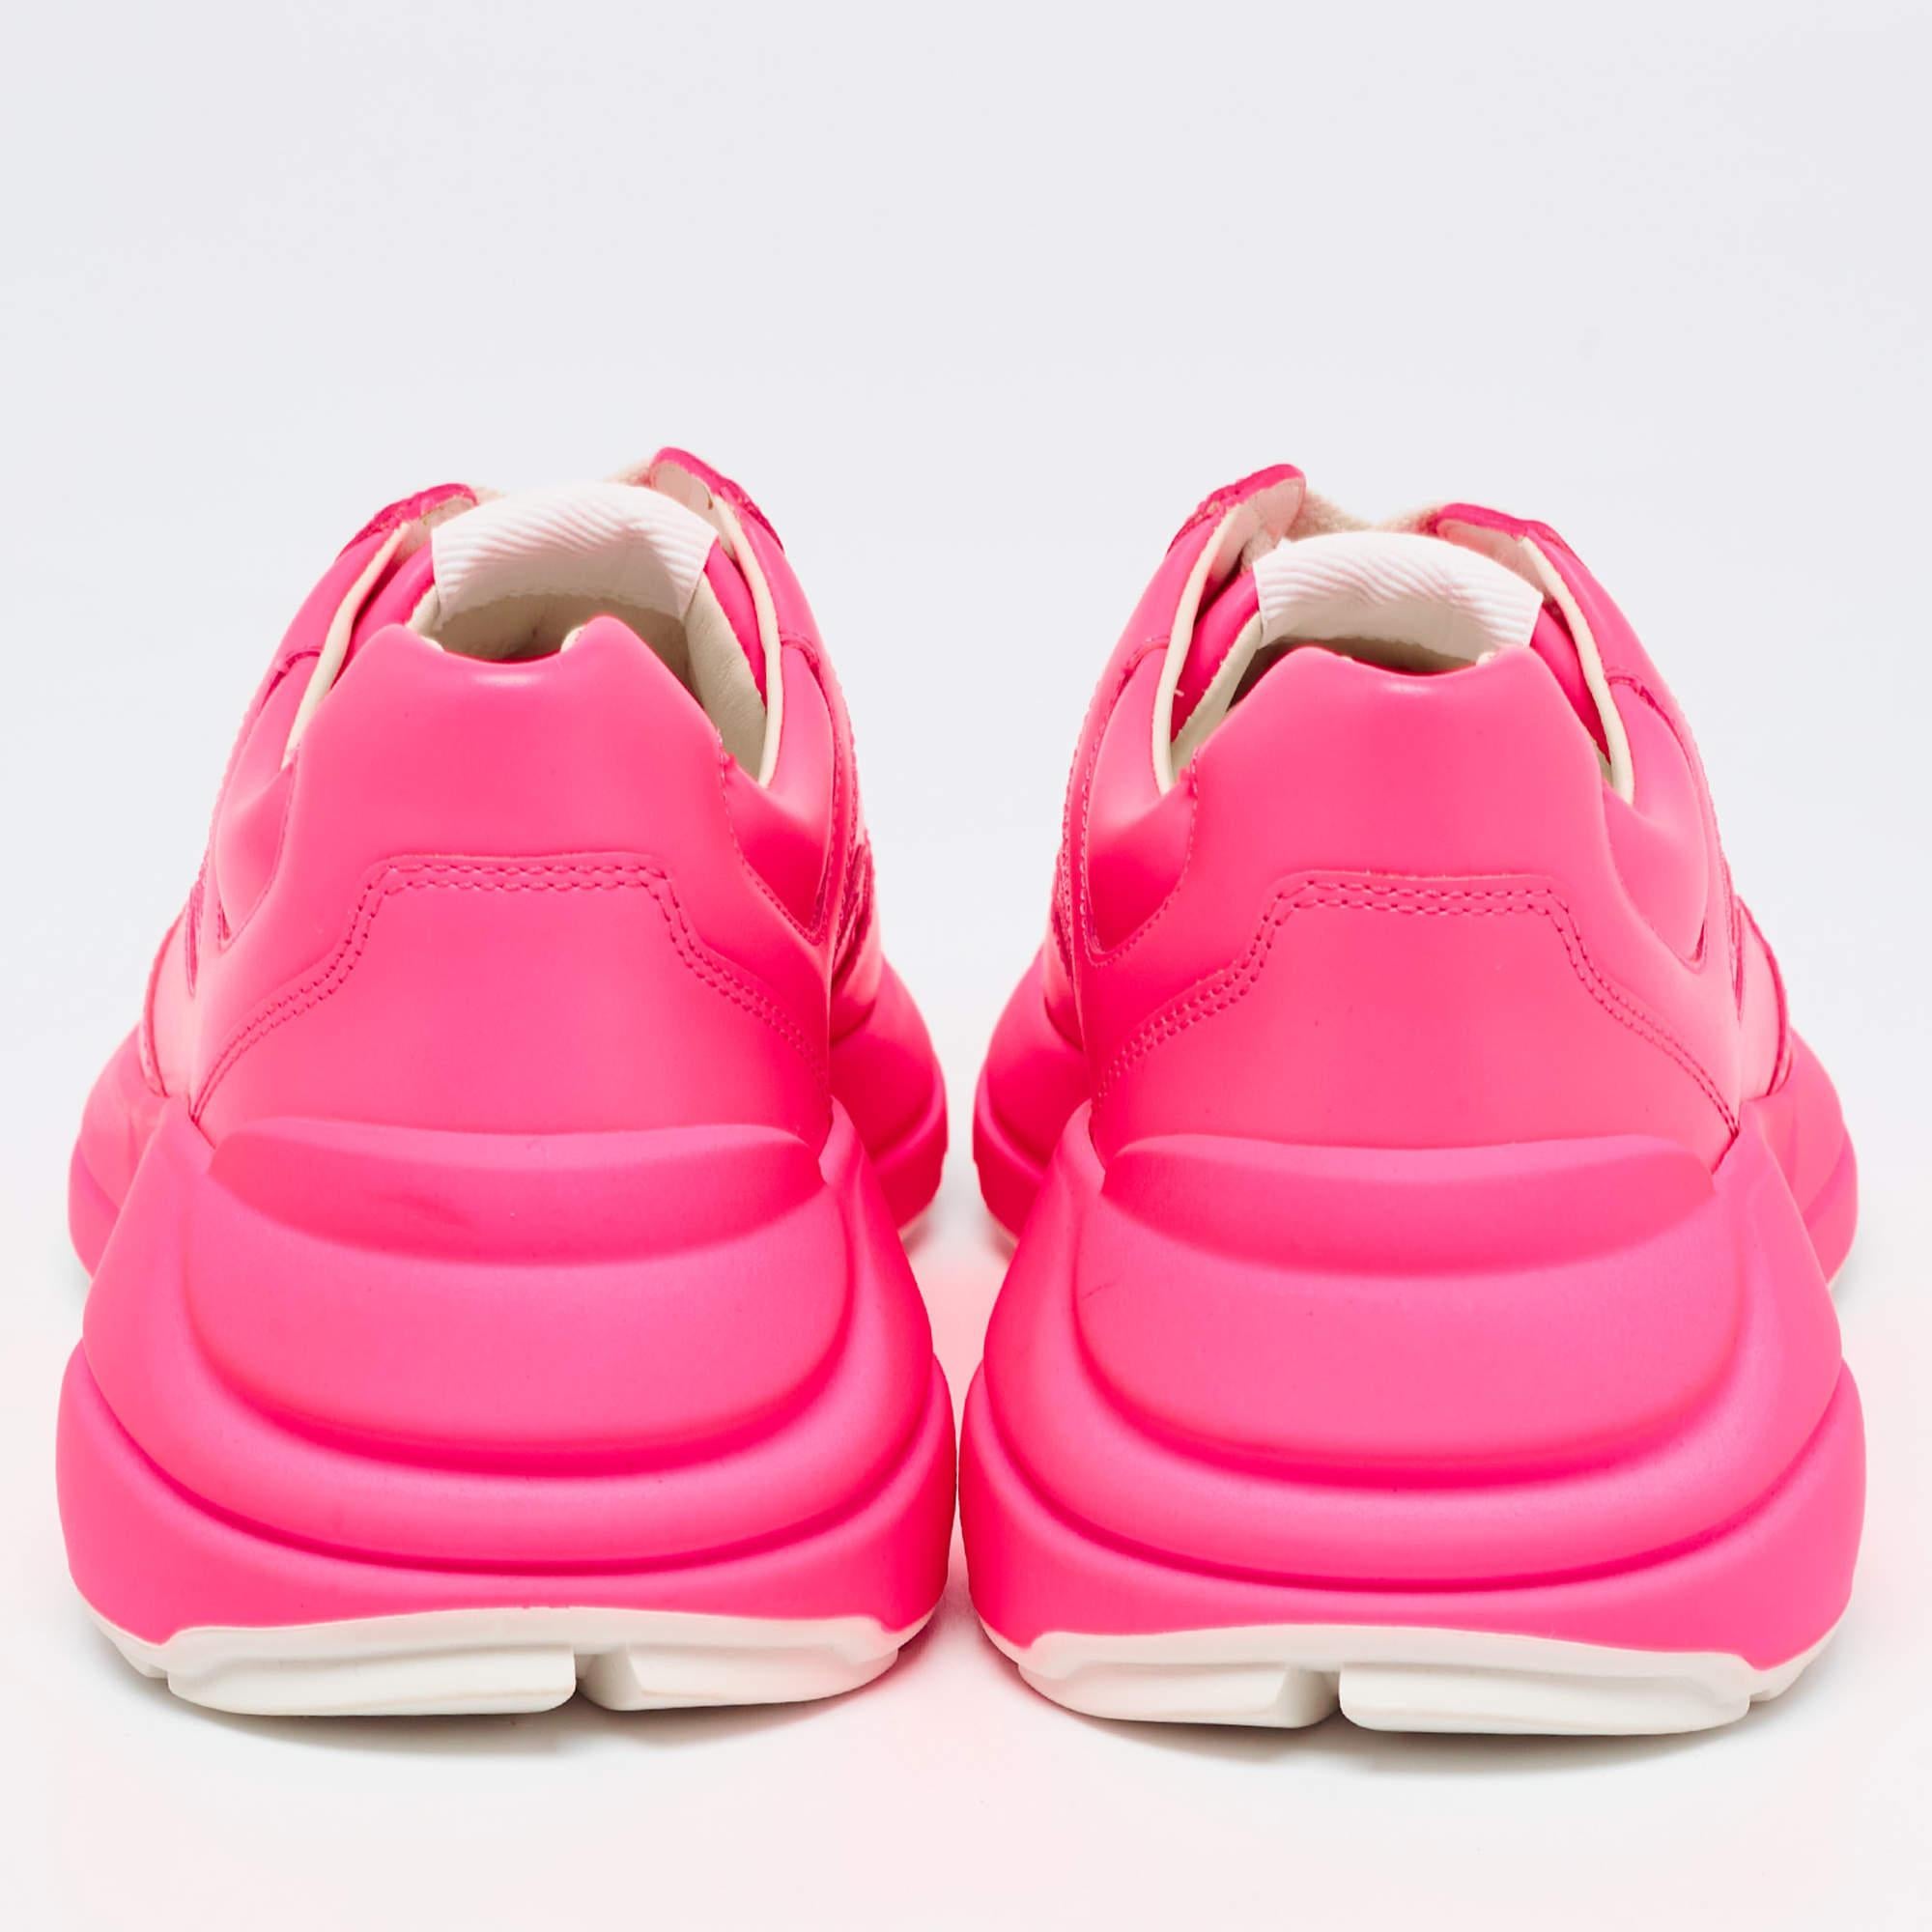 Gucci Neon Pink Leather Rhyton Sneakers Size 39 For Sale 2